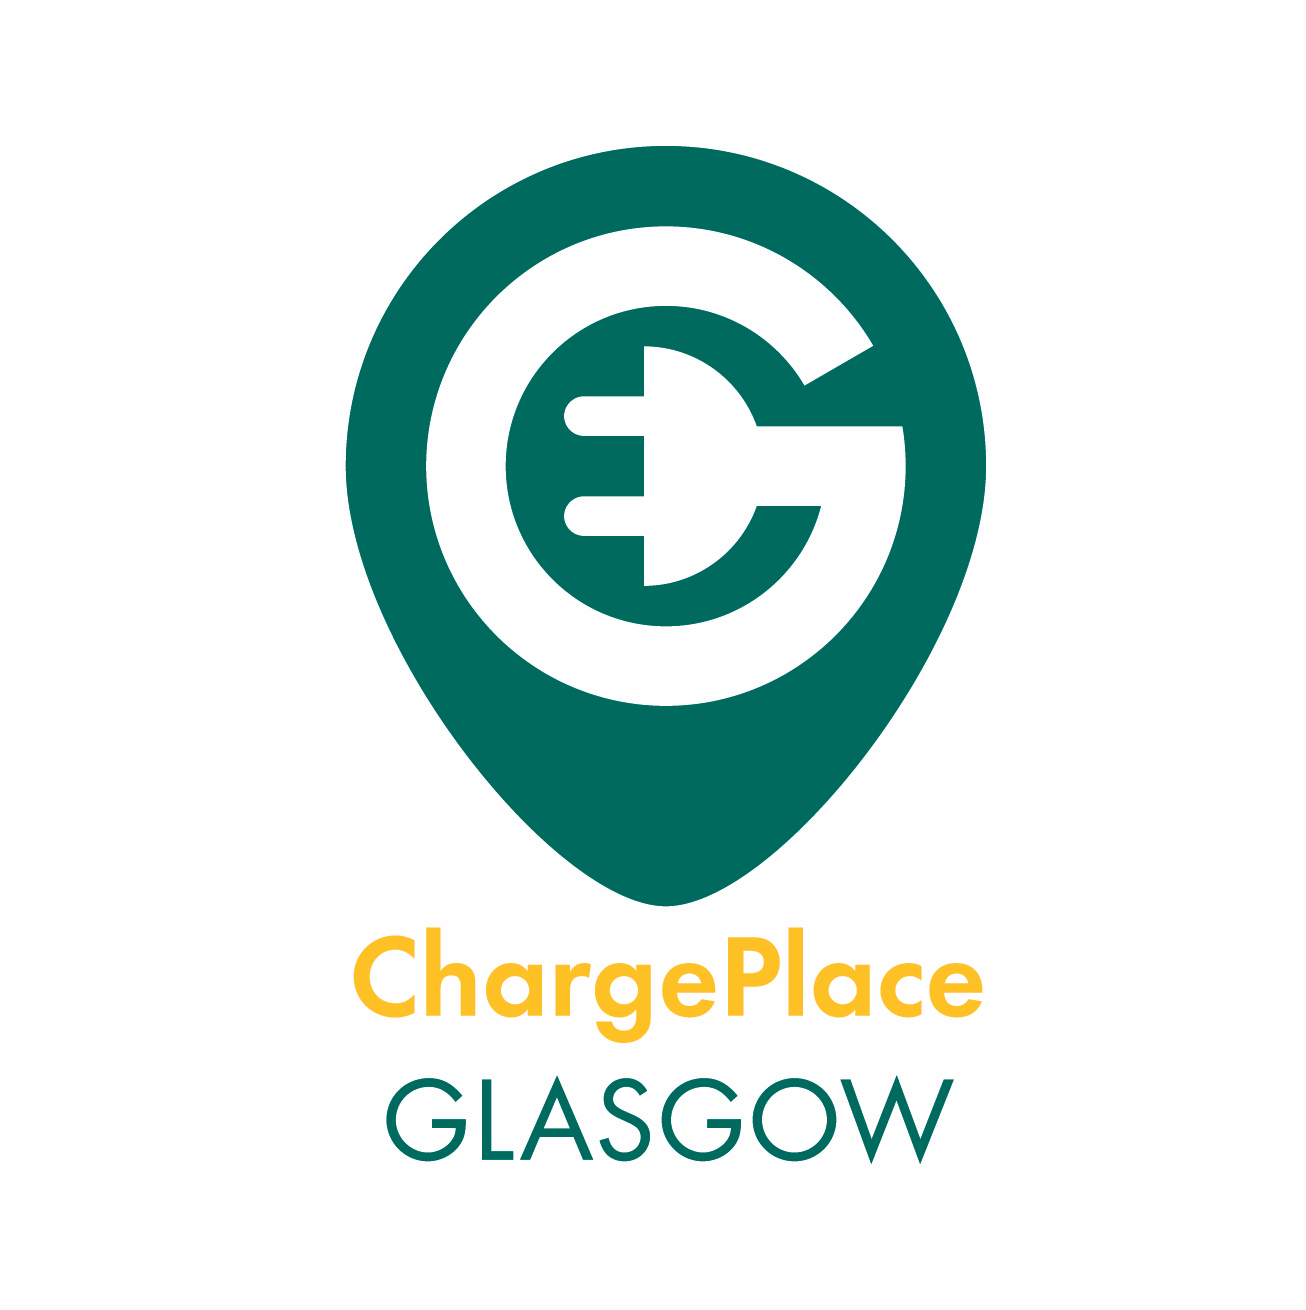 ChargePlace Glasgow